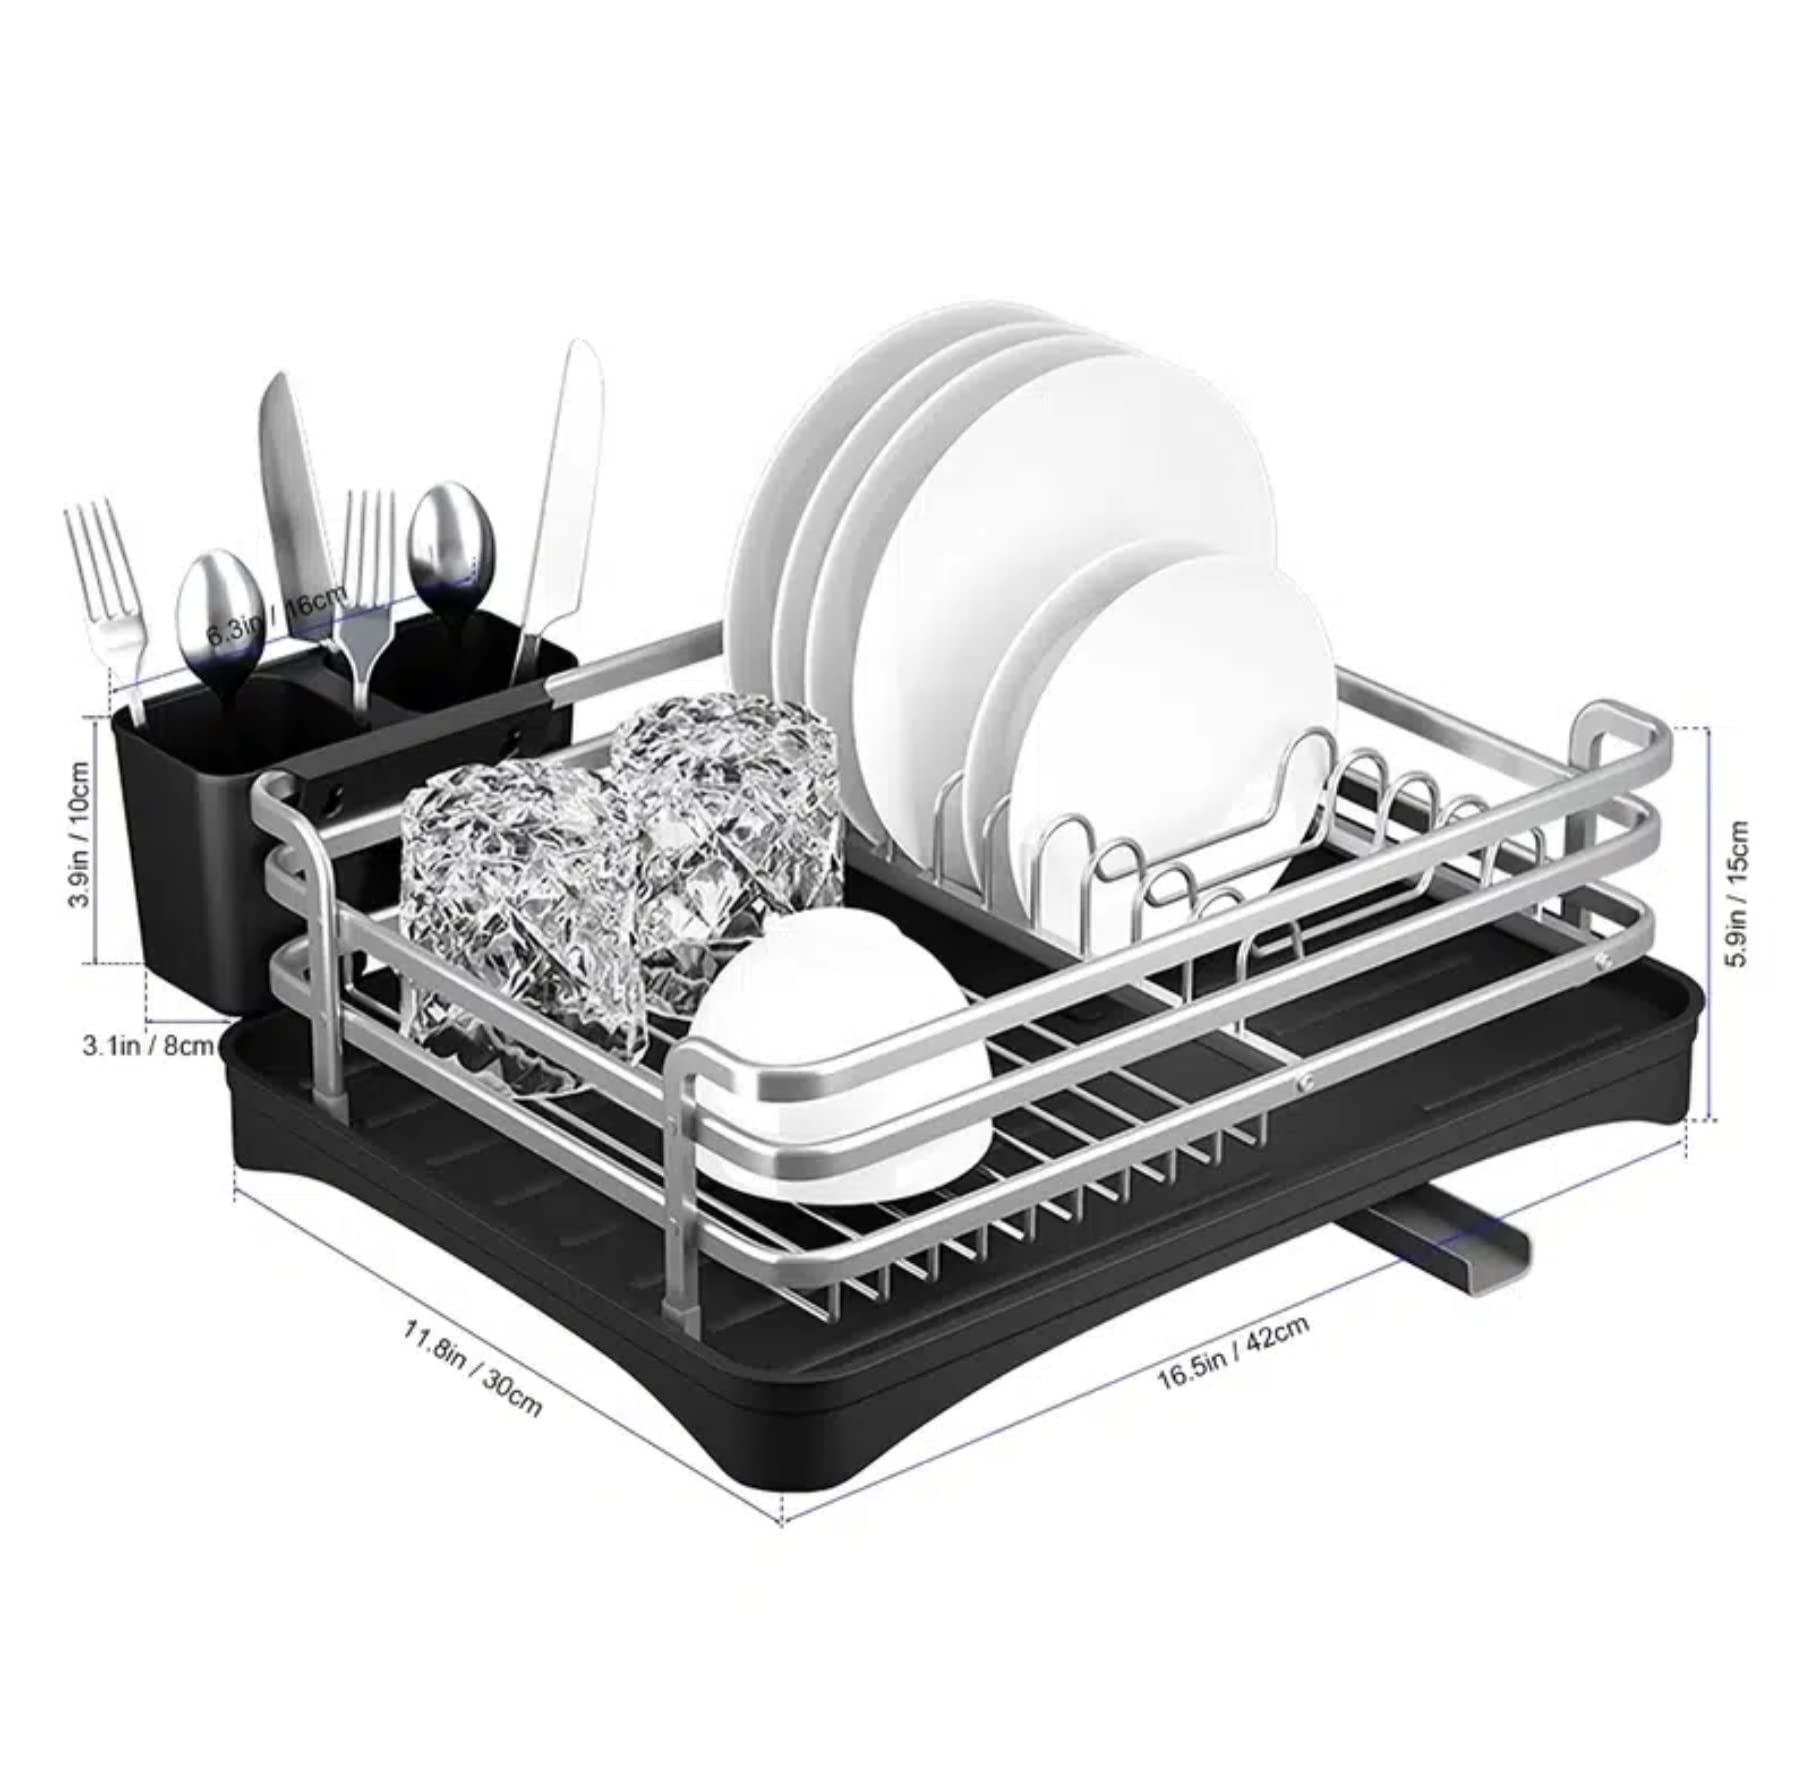 1pc Dish Drying Rack, Space-Saving Dish Rack, Dish Racks for Kitchen Counter, Durable Stainless Steel Kitchen Drying Rack with A Cutlery Holder, Drying Rack for Dishes, Knives, Spoons, and Forks